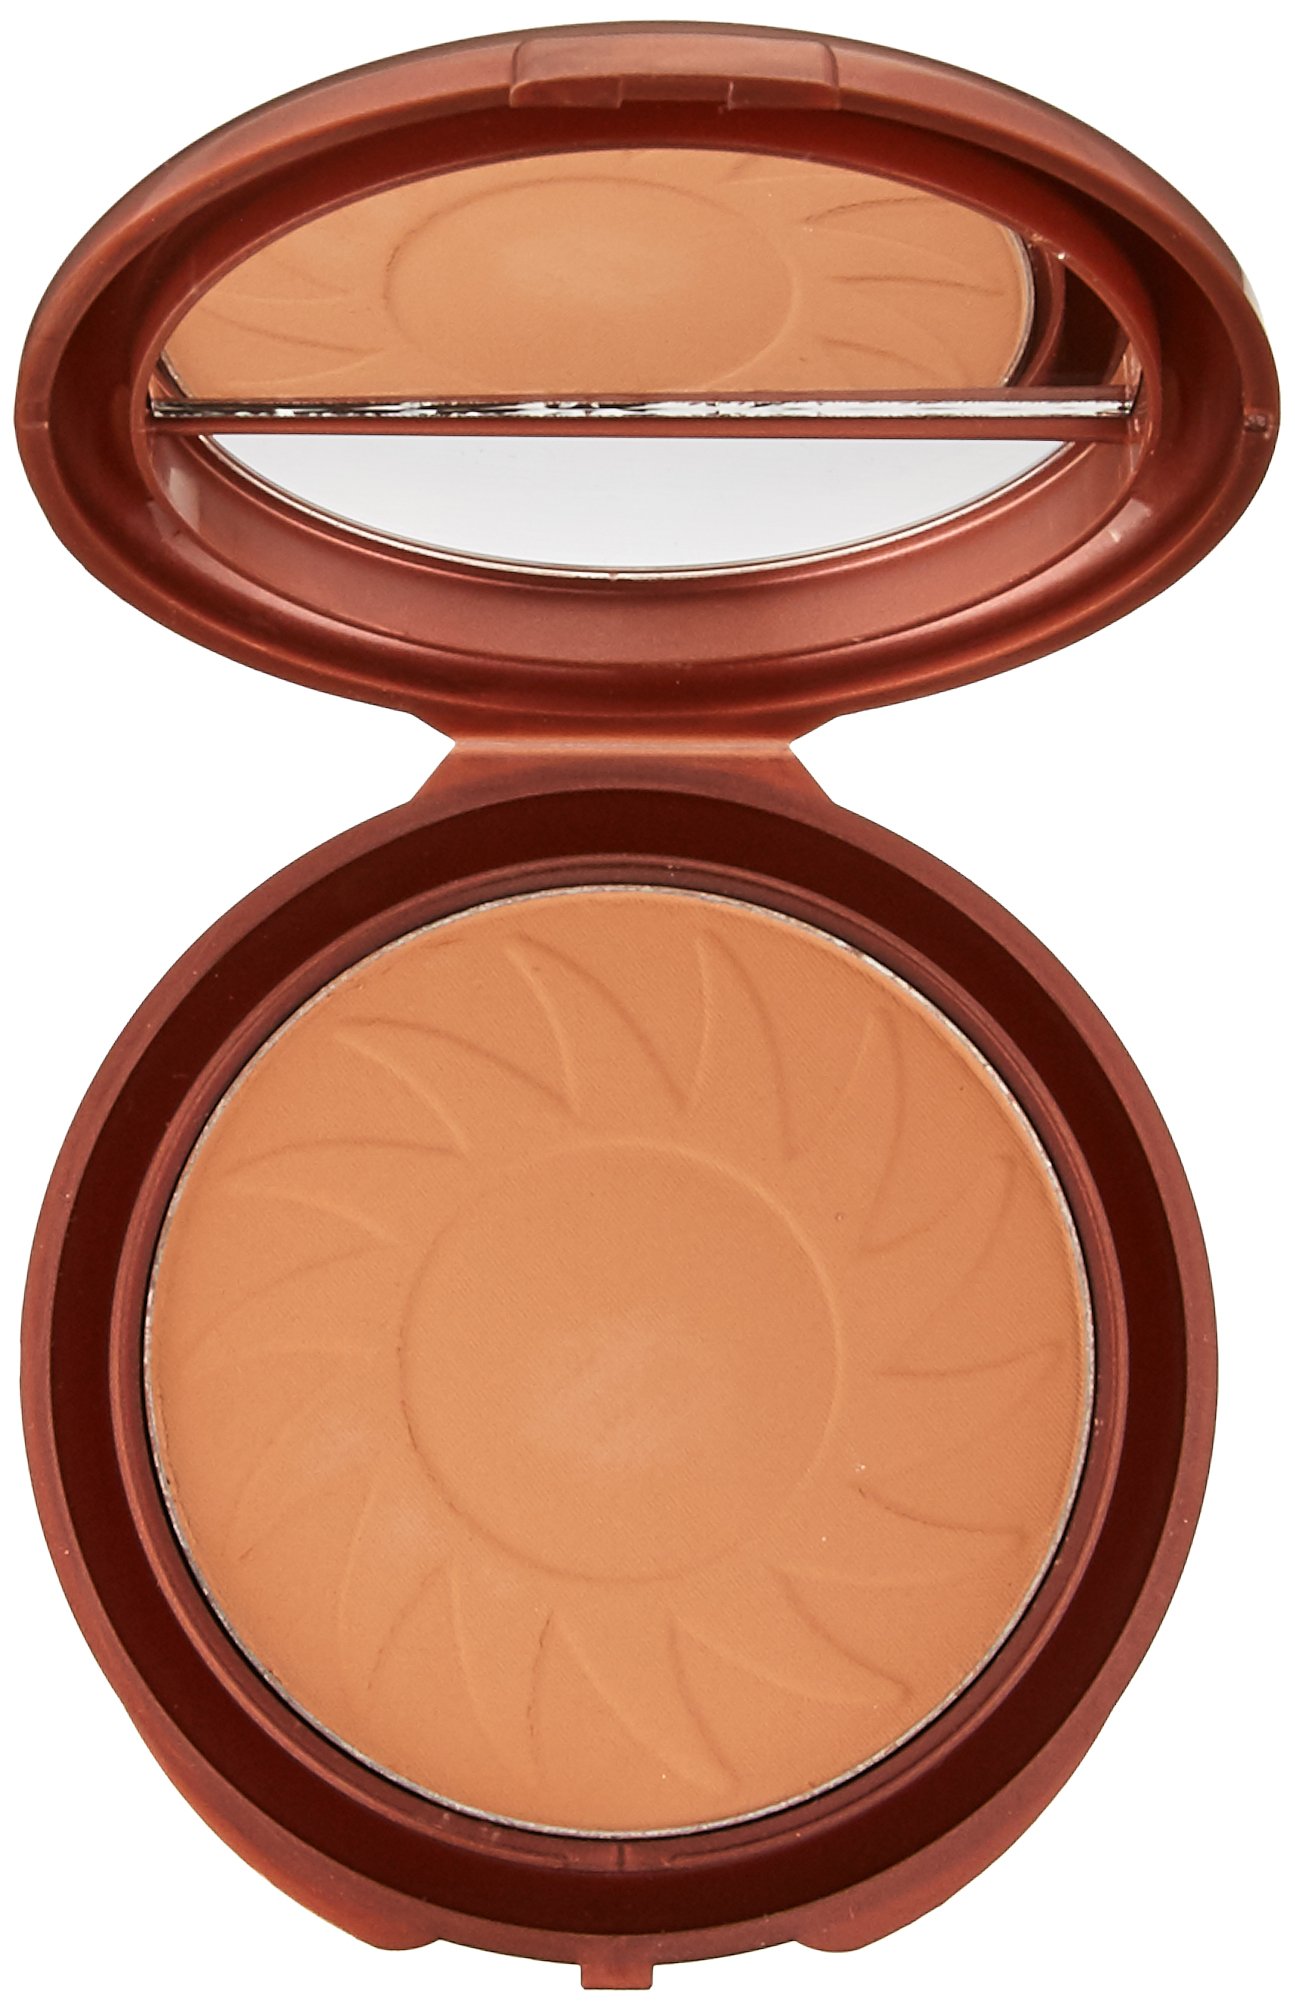 N.Y.C. New York Color Smooth Skin Bronzer, Sunny, 0.33 Ounce